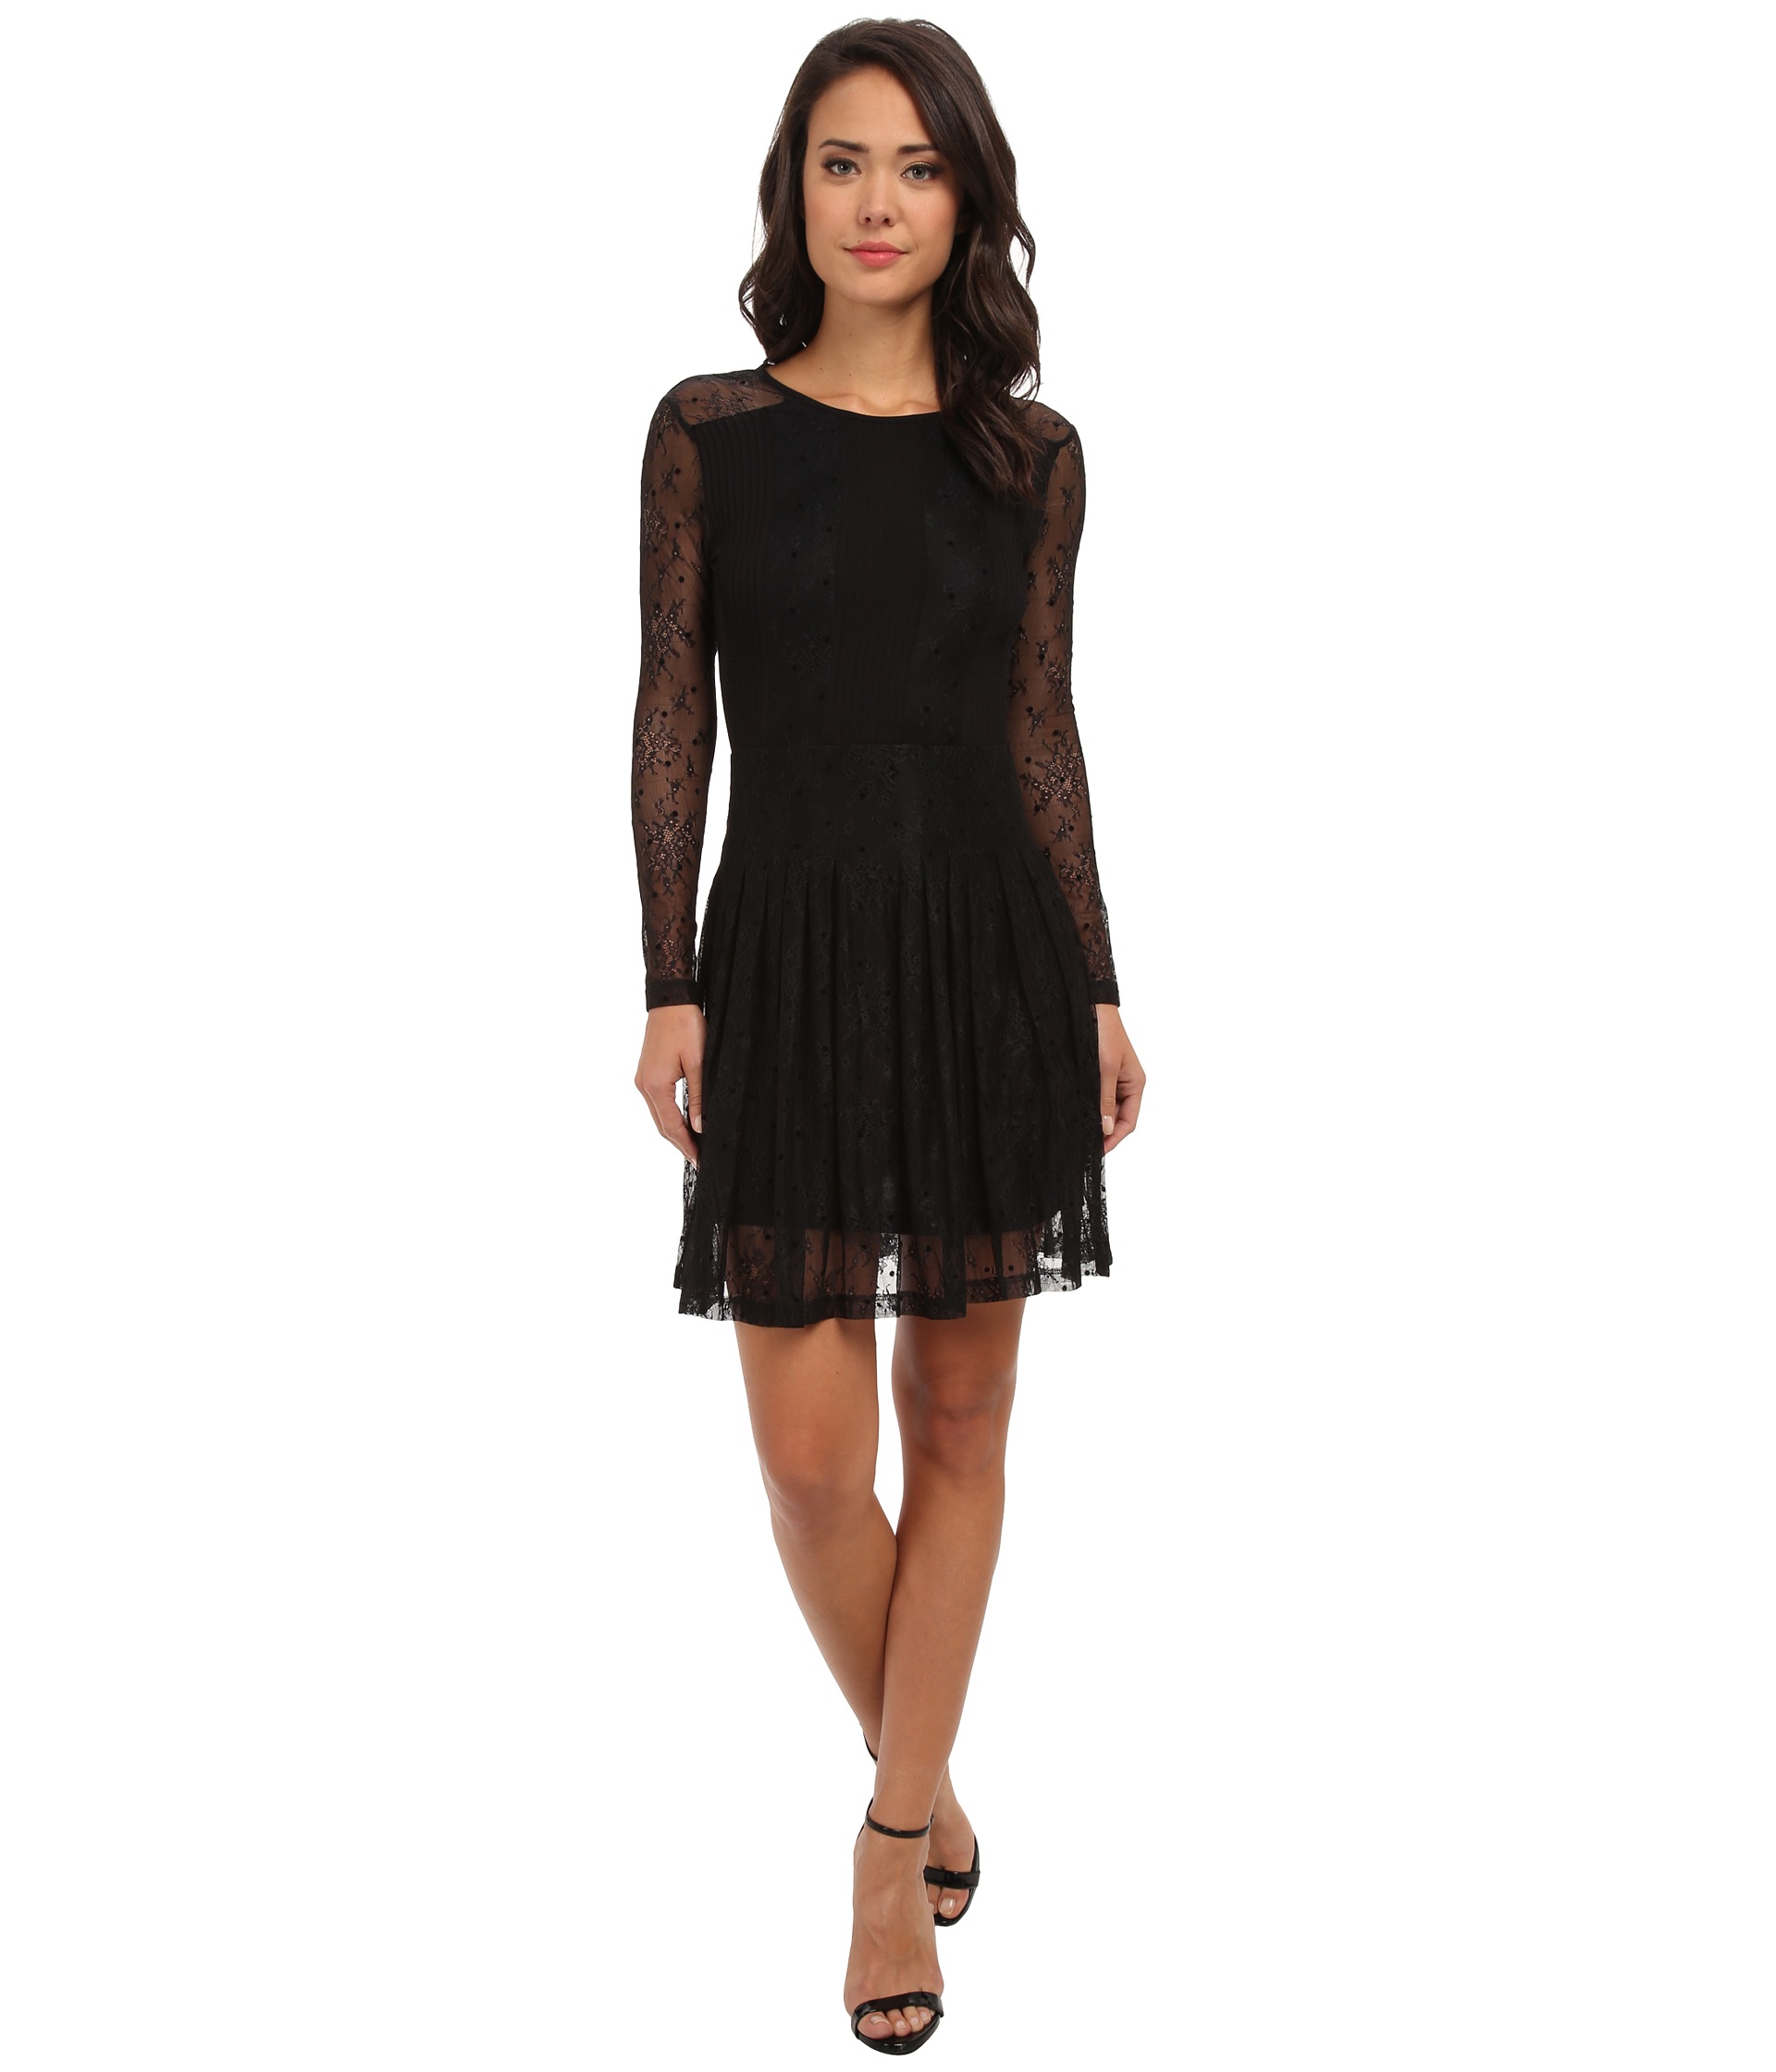 Cheap & Chic Lace Little Black Dresses For This Season - 28 July 2015 ...